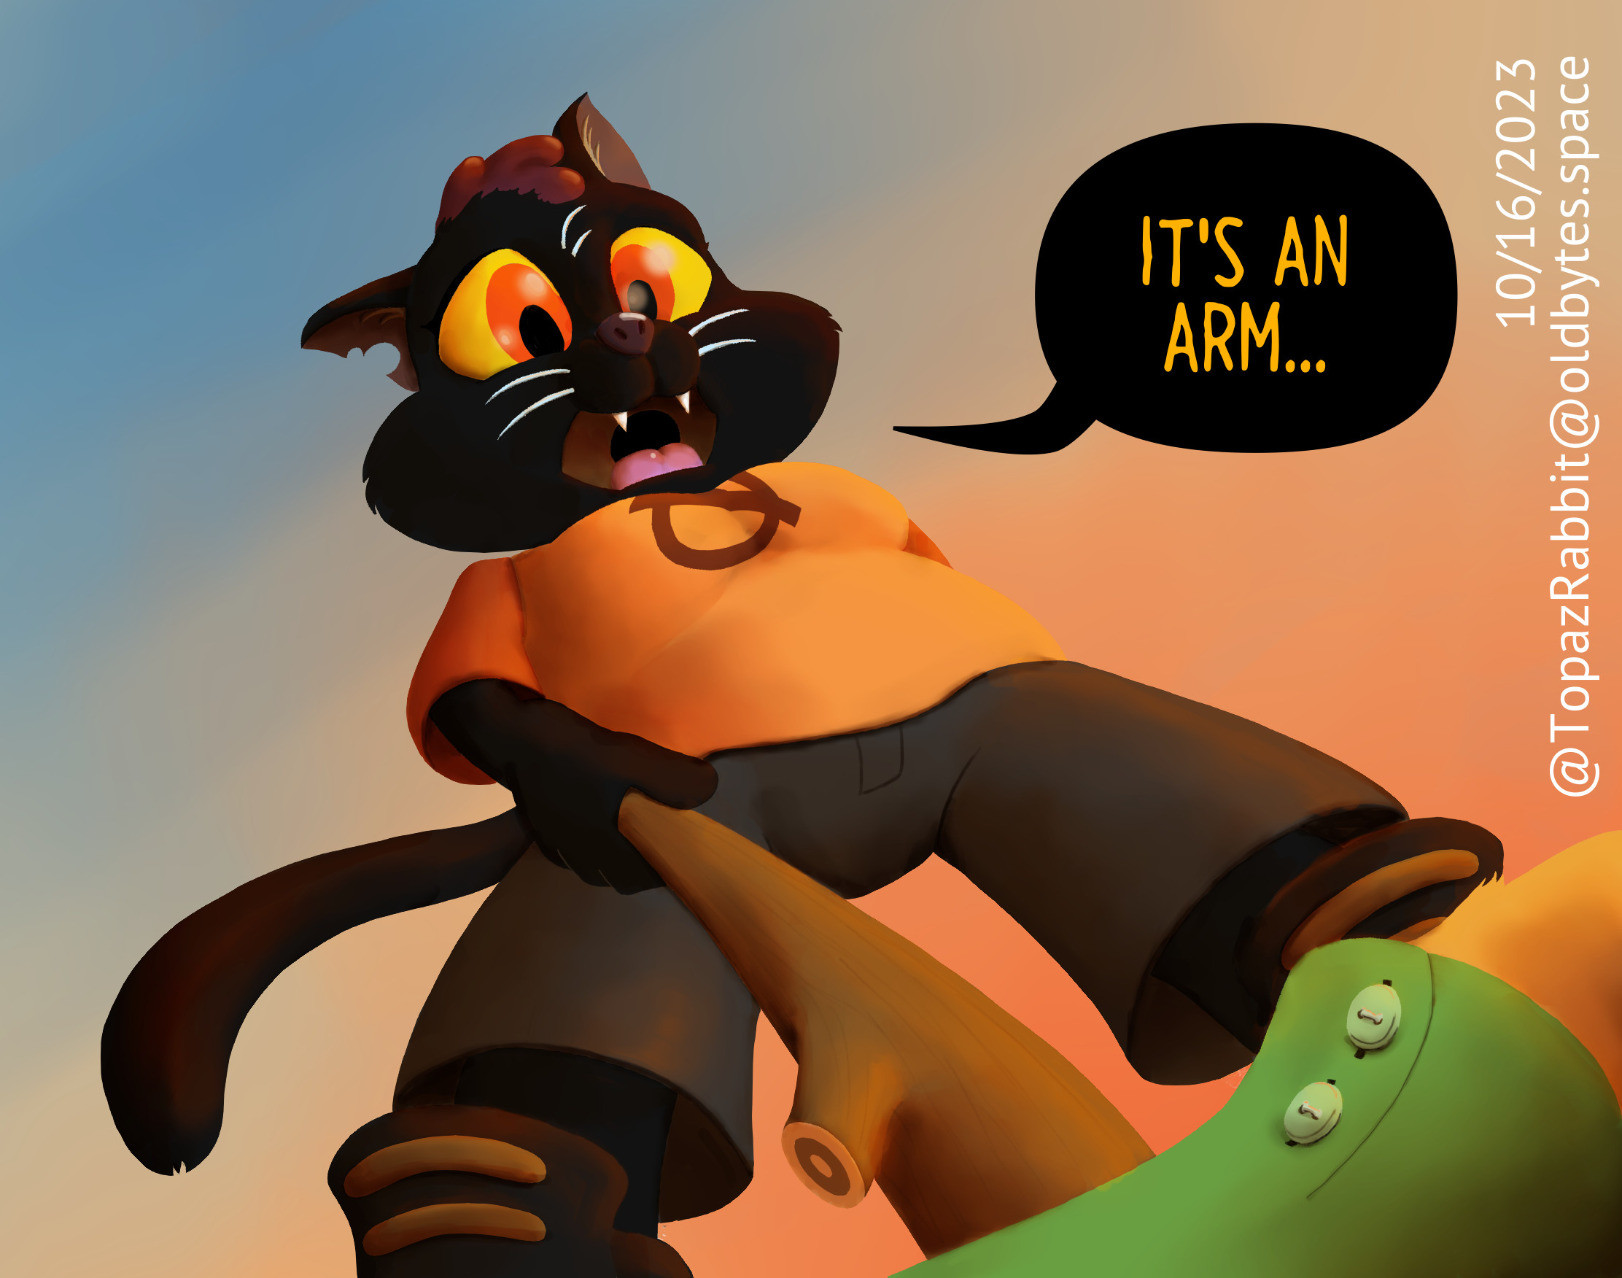 An anthropomorphic black cat with a stick pokes at an arm lying on the ground, saying "It's an arm..."